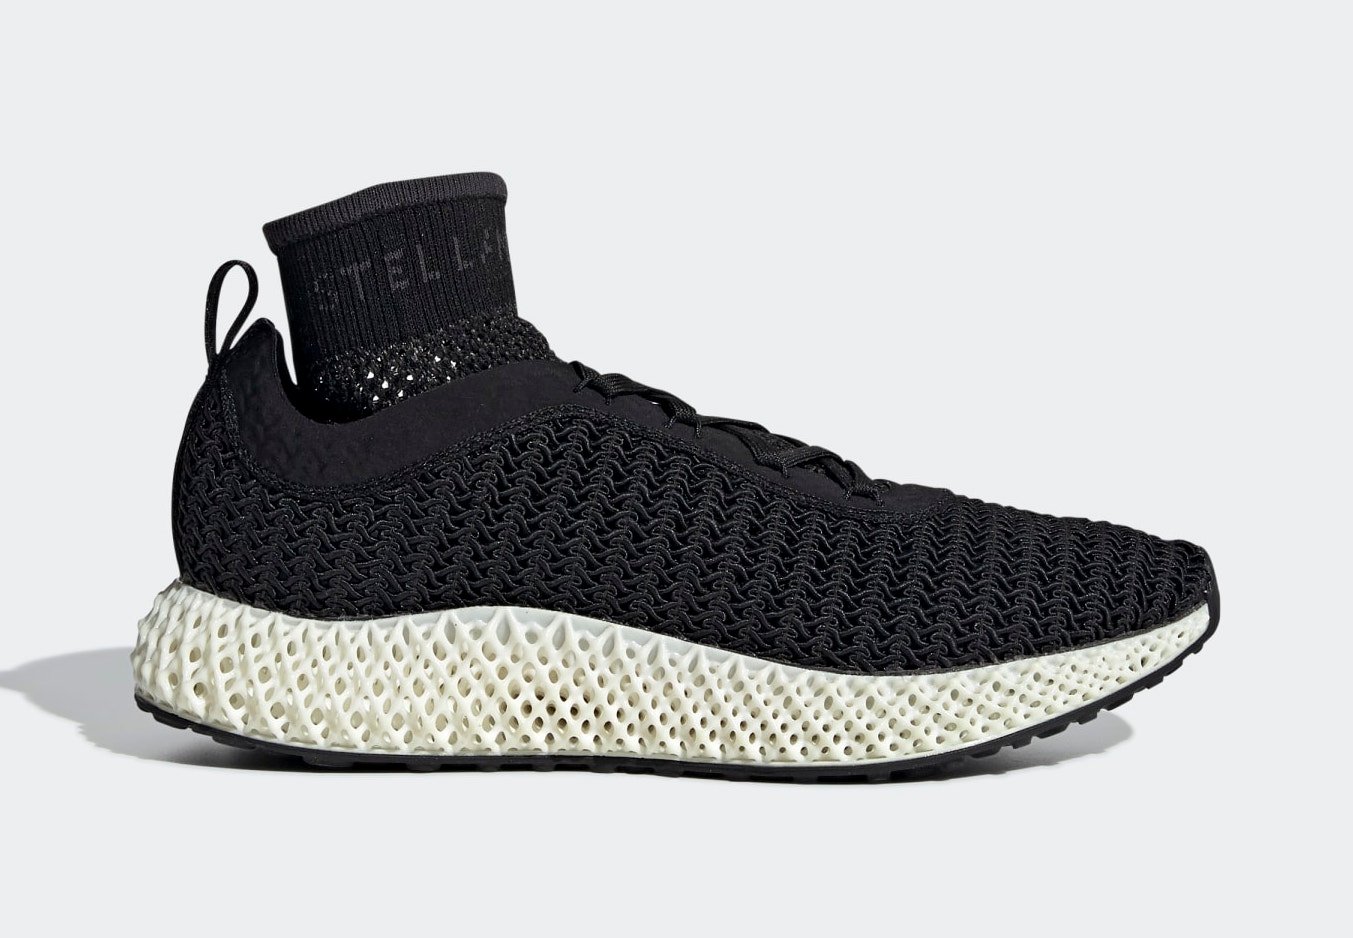 Stella McCartney is Releasing Her Own Version of the adidas AlphaEdge 4D